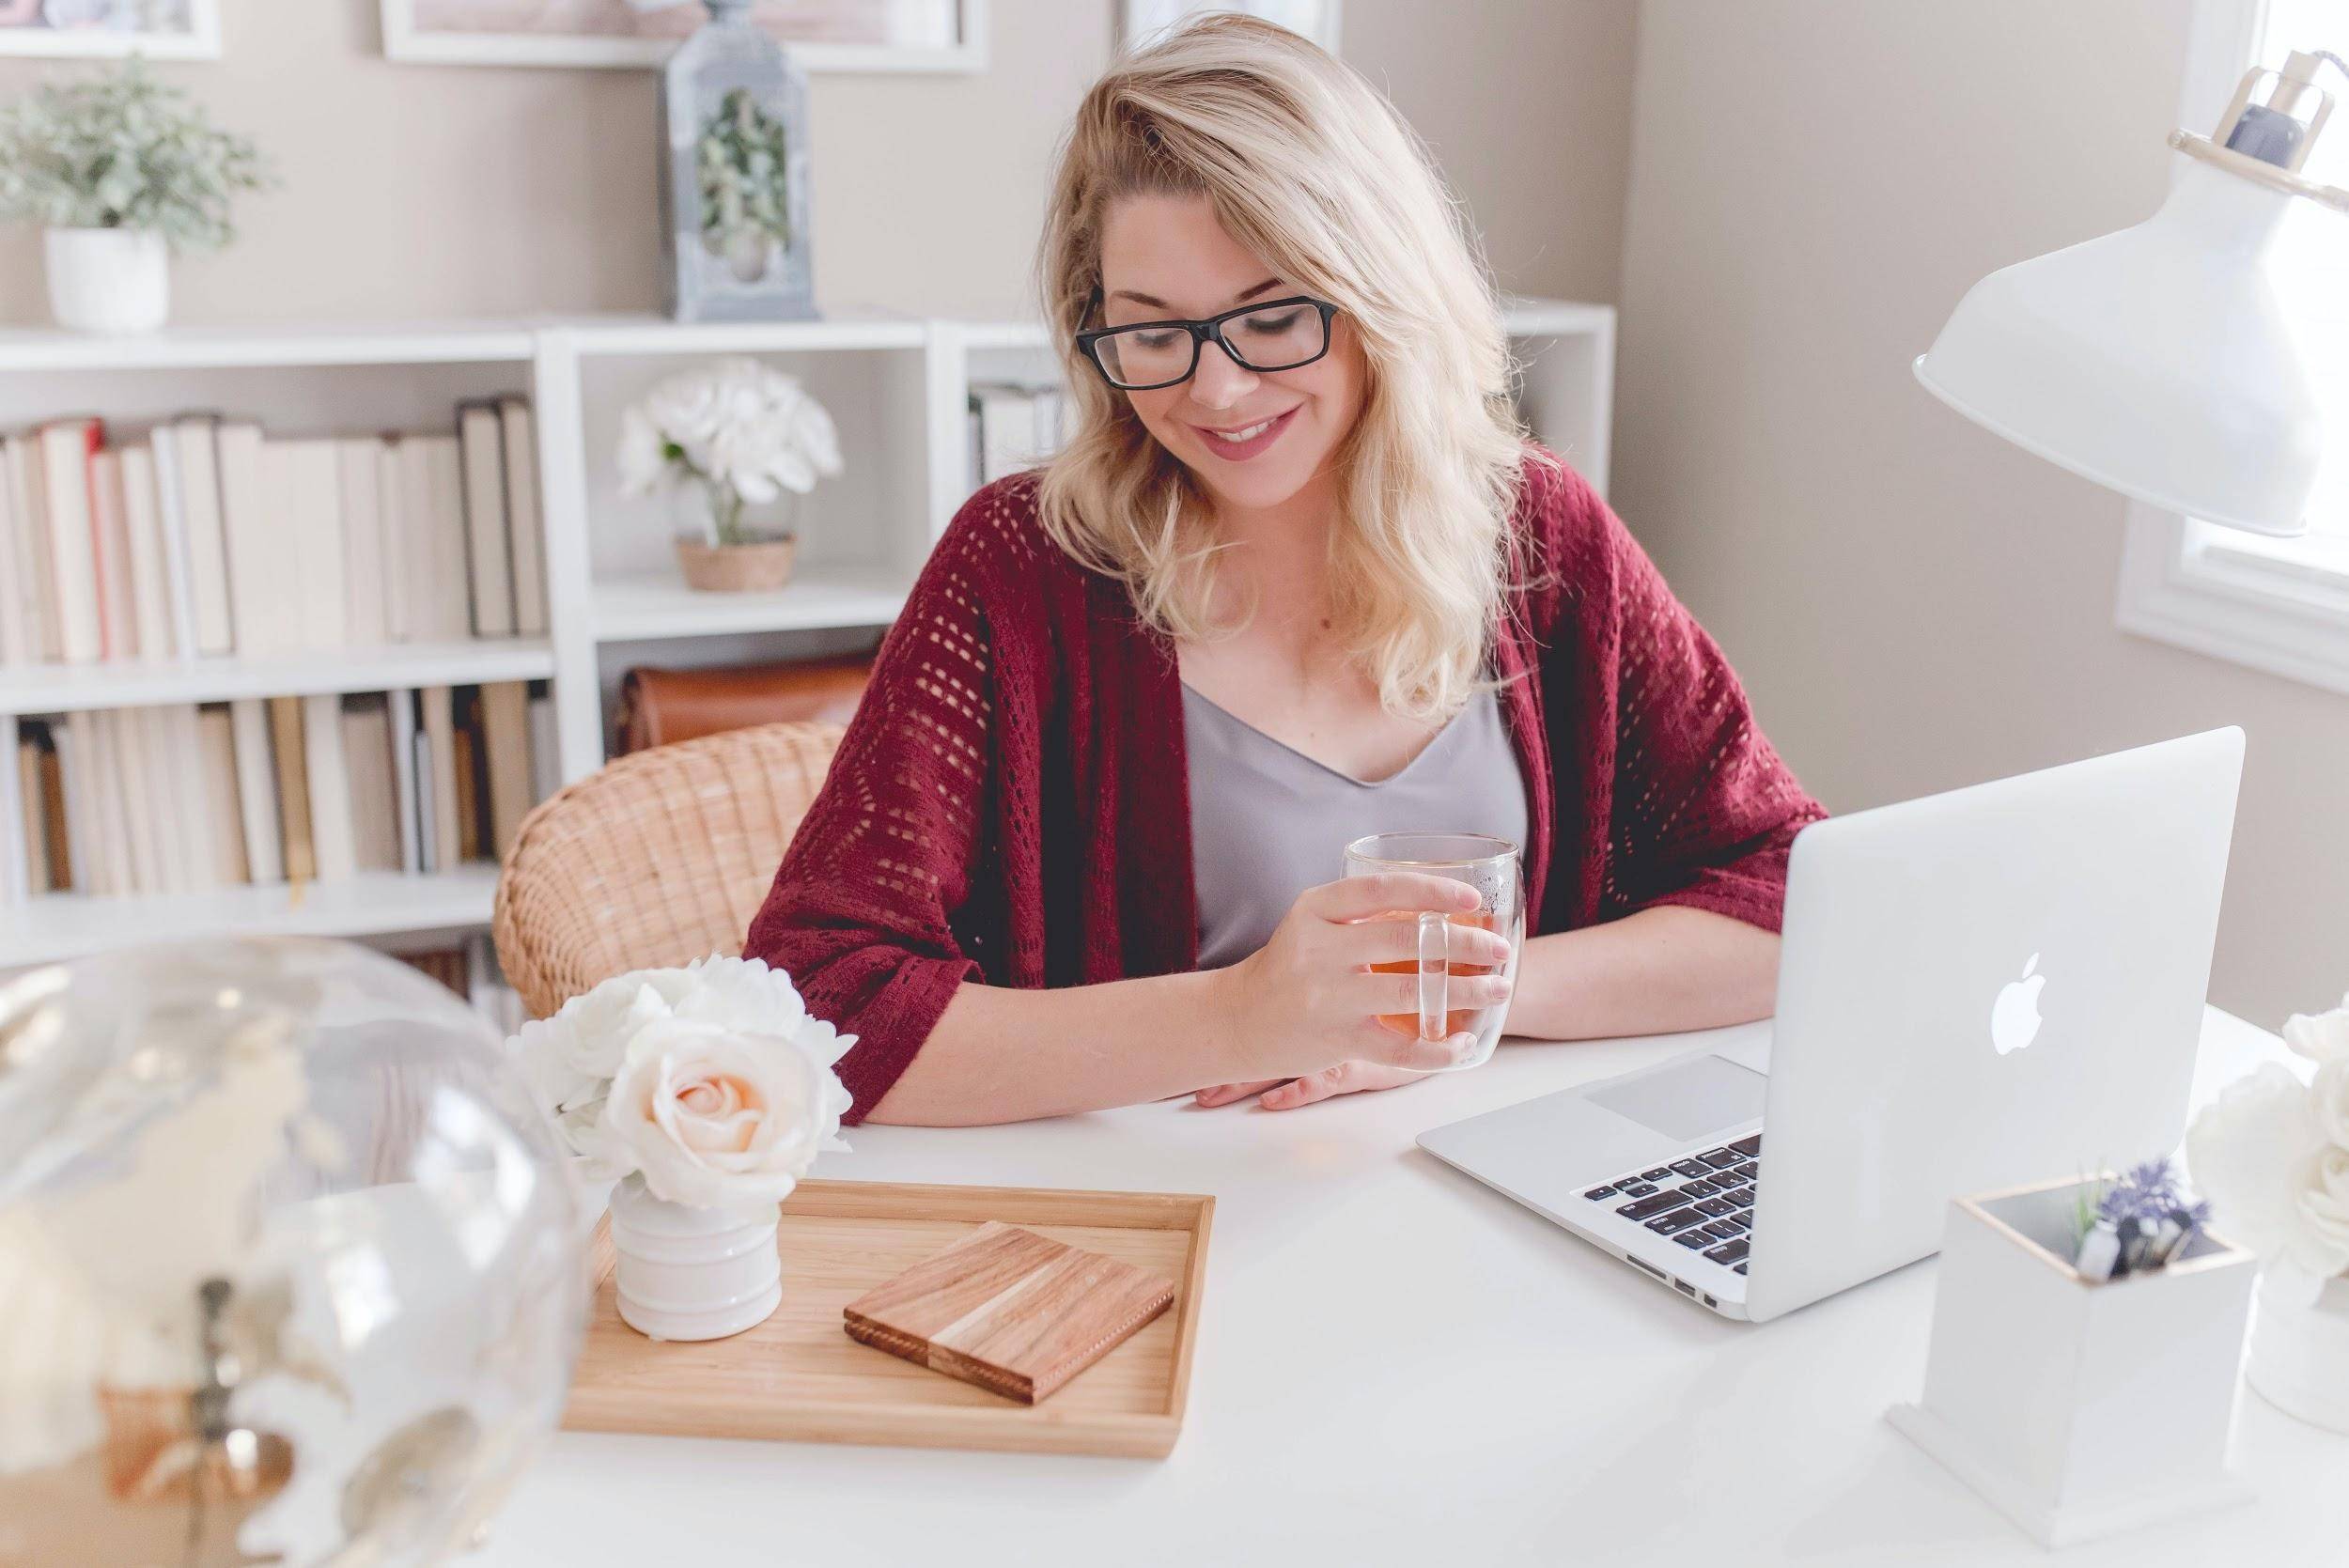 Young working women working from home in a stylish set-up